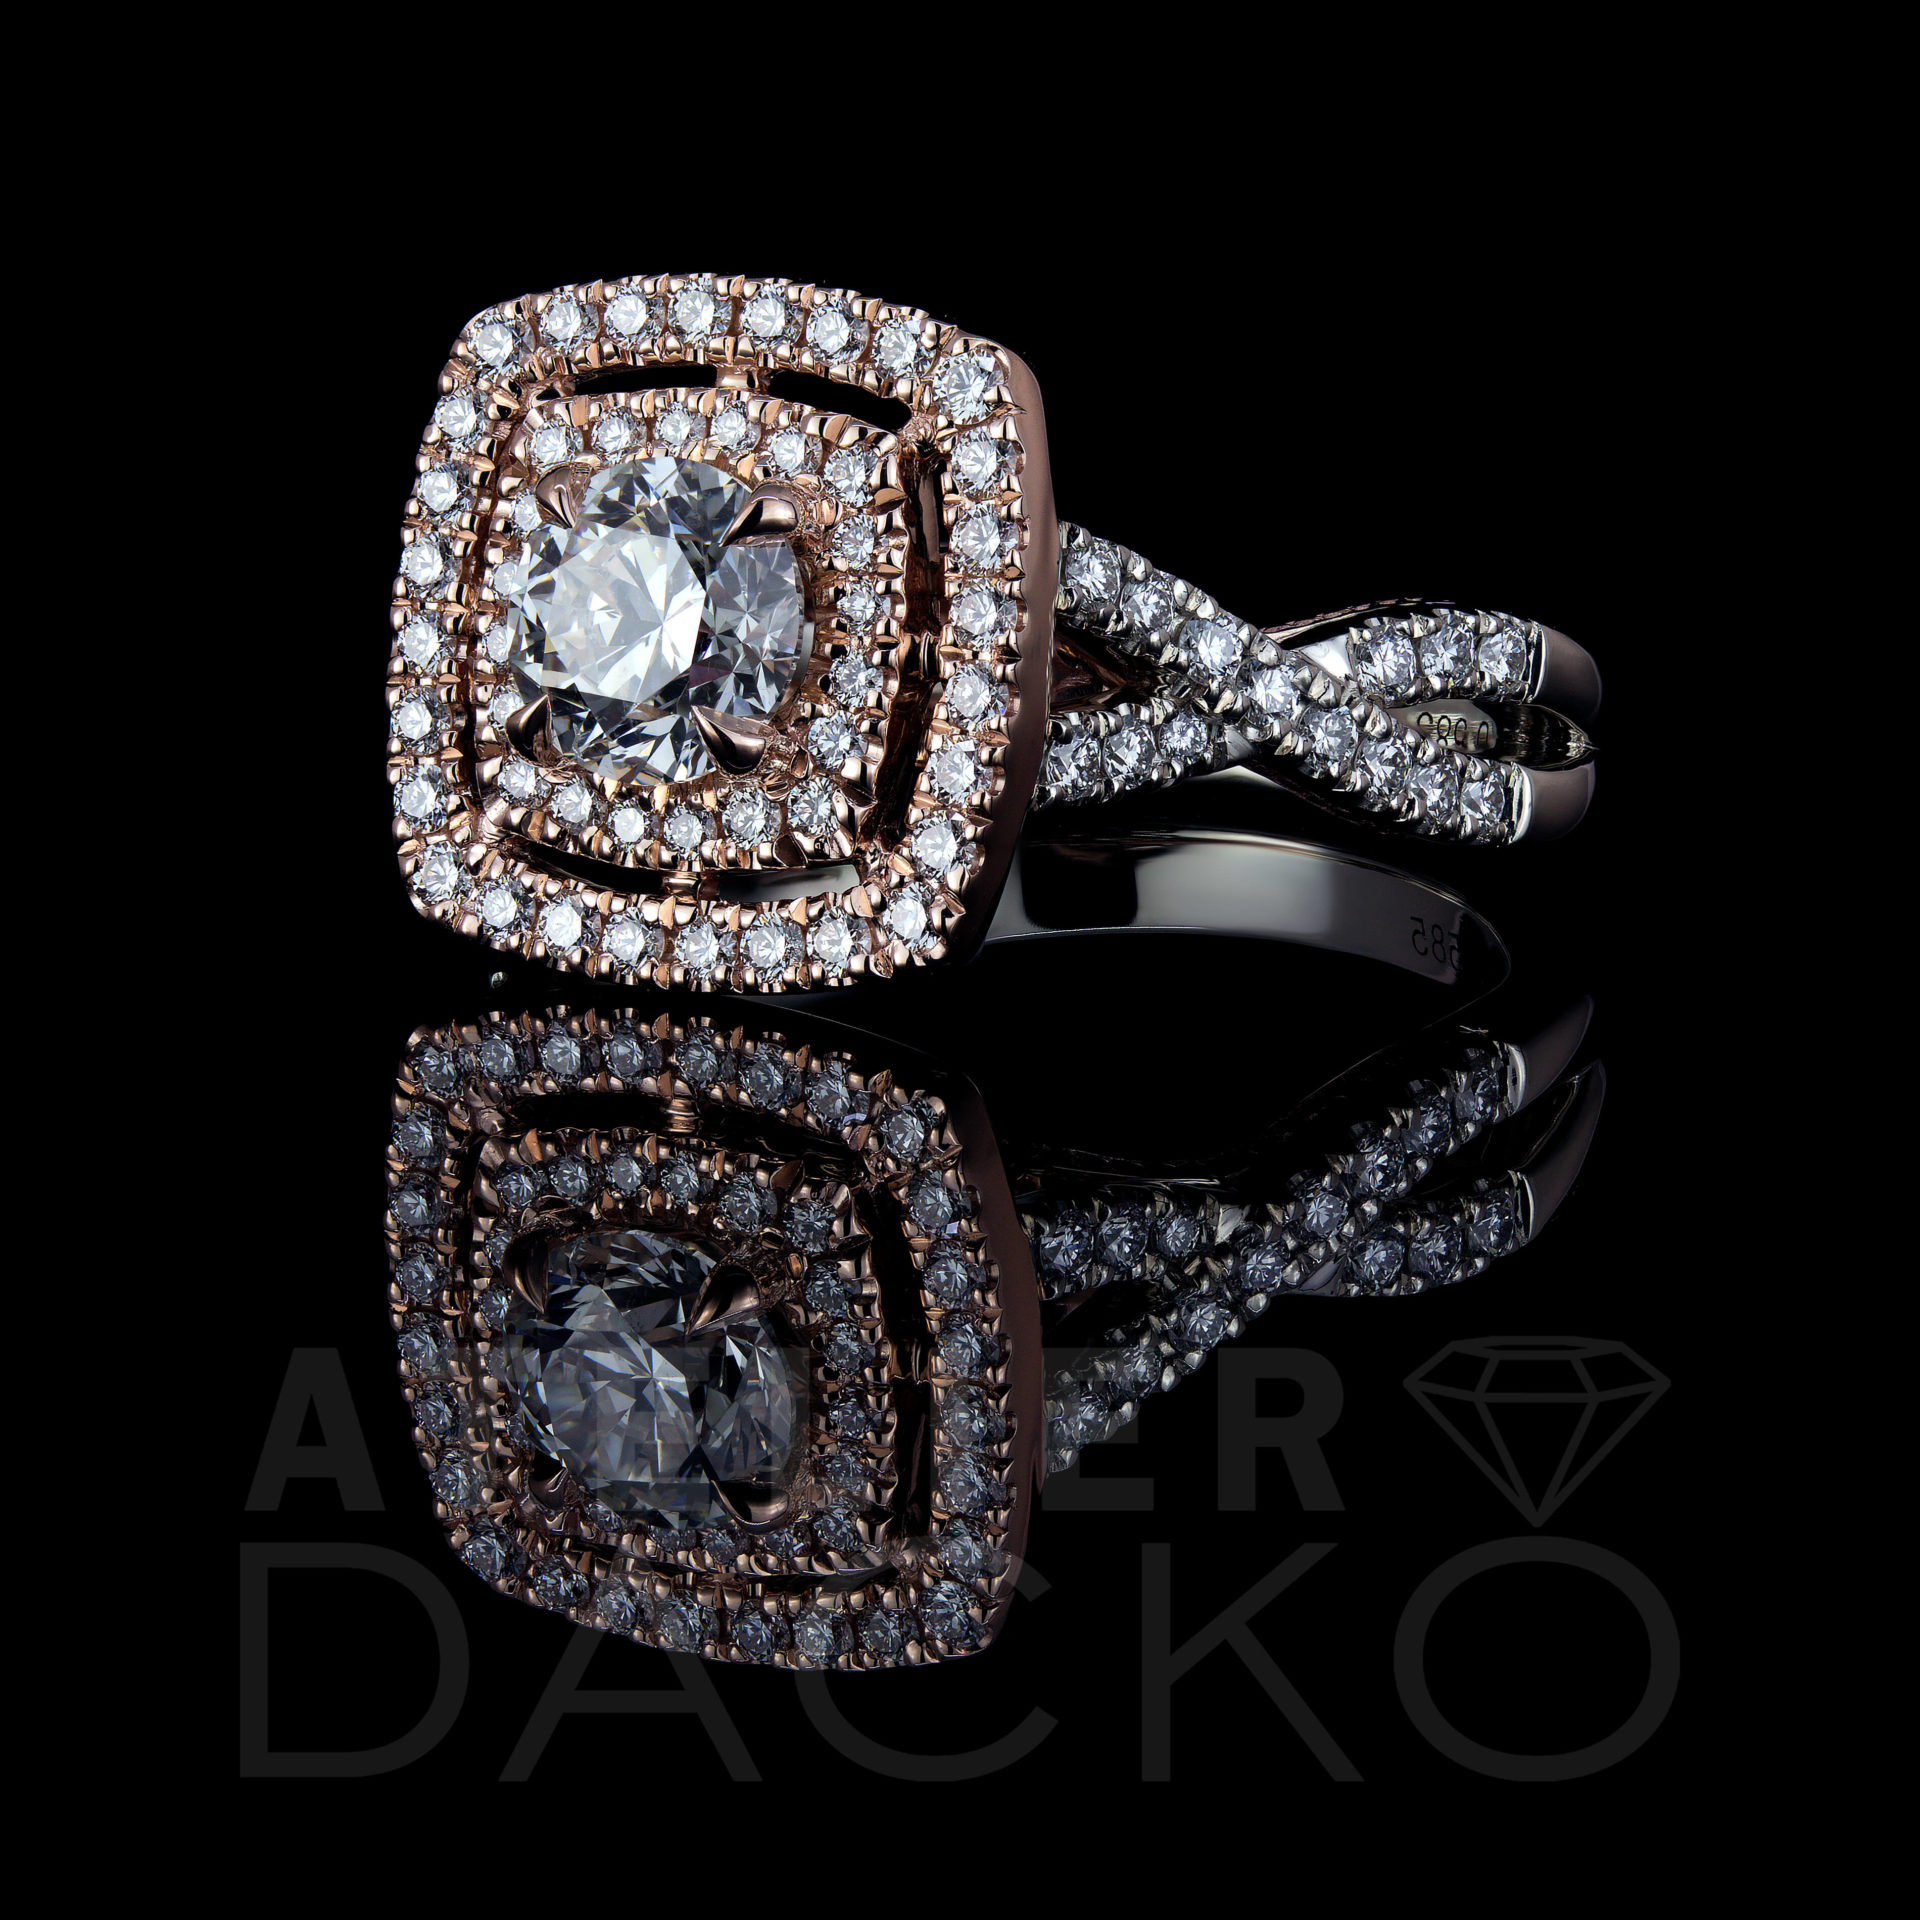 AD023 - 0.64 CT Round Diamond Double Halo Ring with a Ribbon Shank - 2